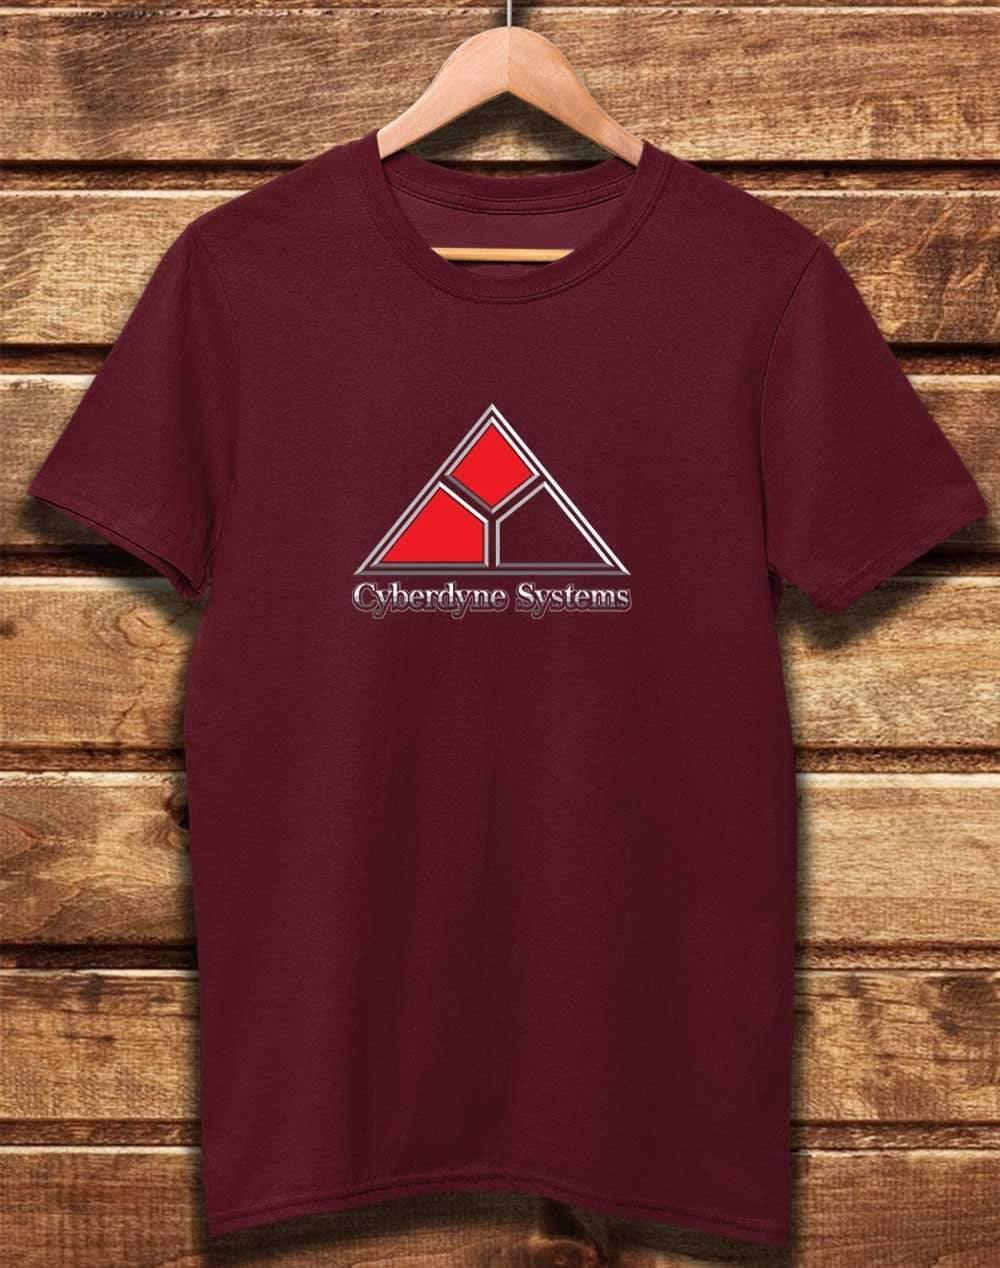 DELUXE Cyberdyne Systems Organic Cotton T-Shirt XS / Burgundy  - Off World Tees